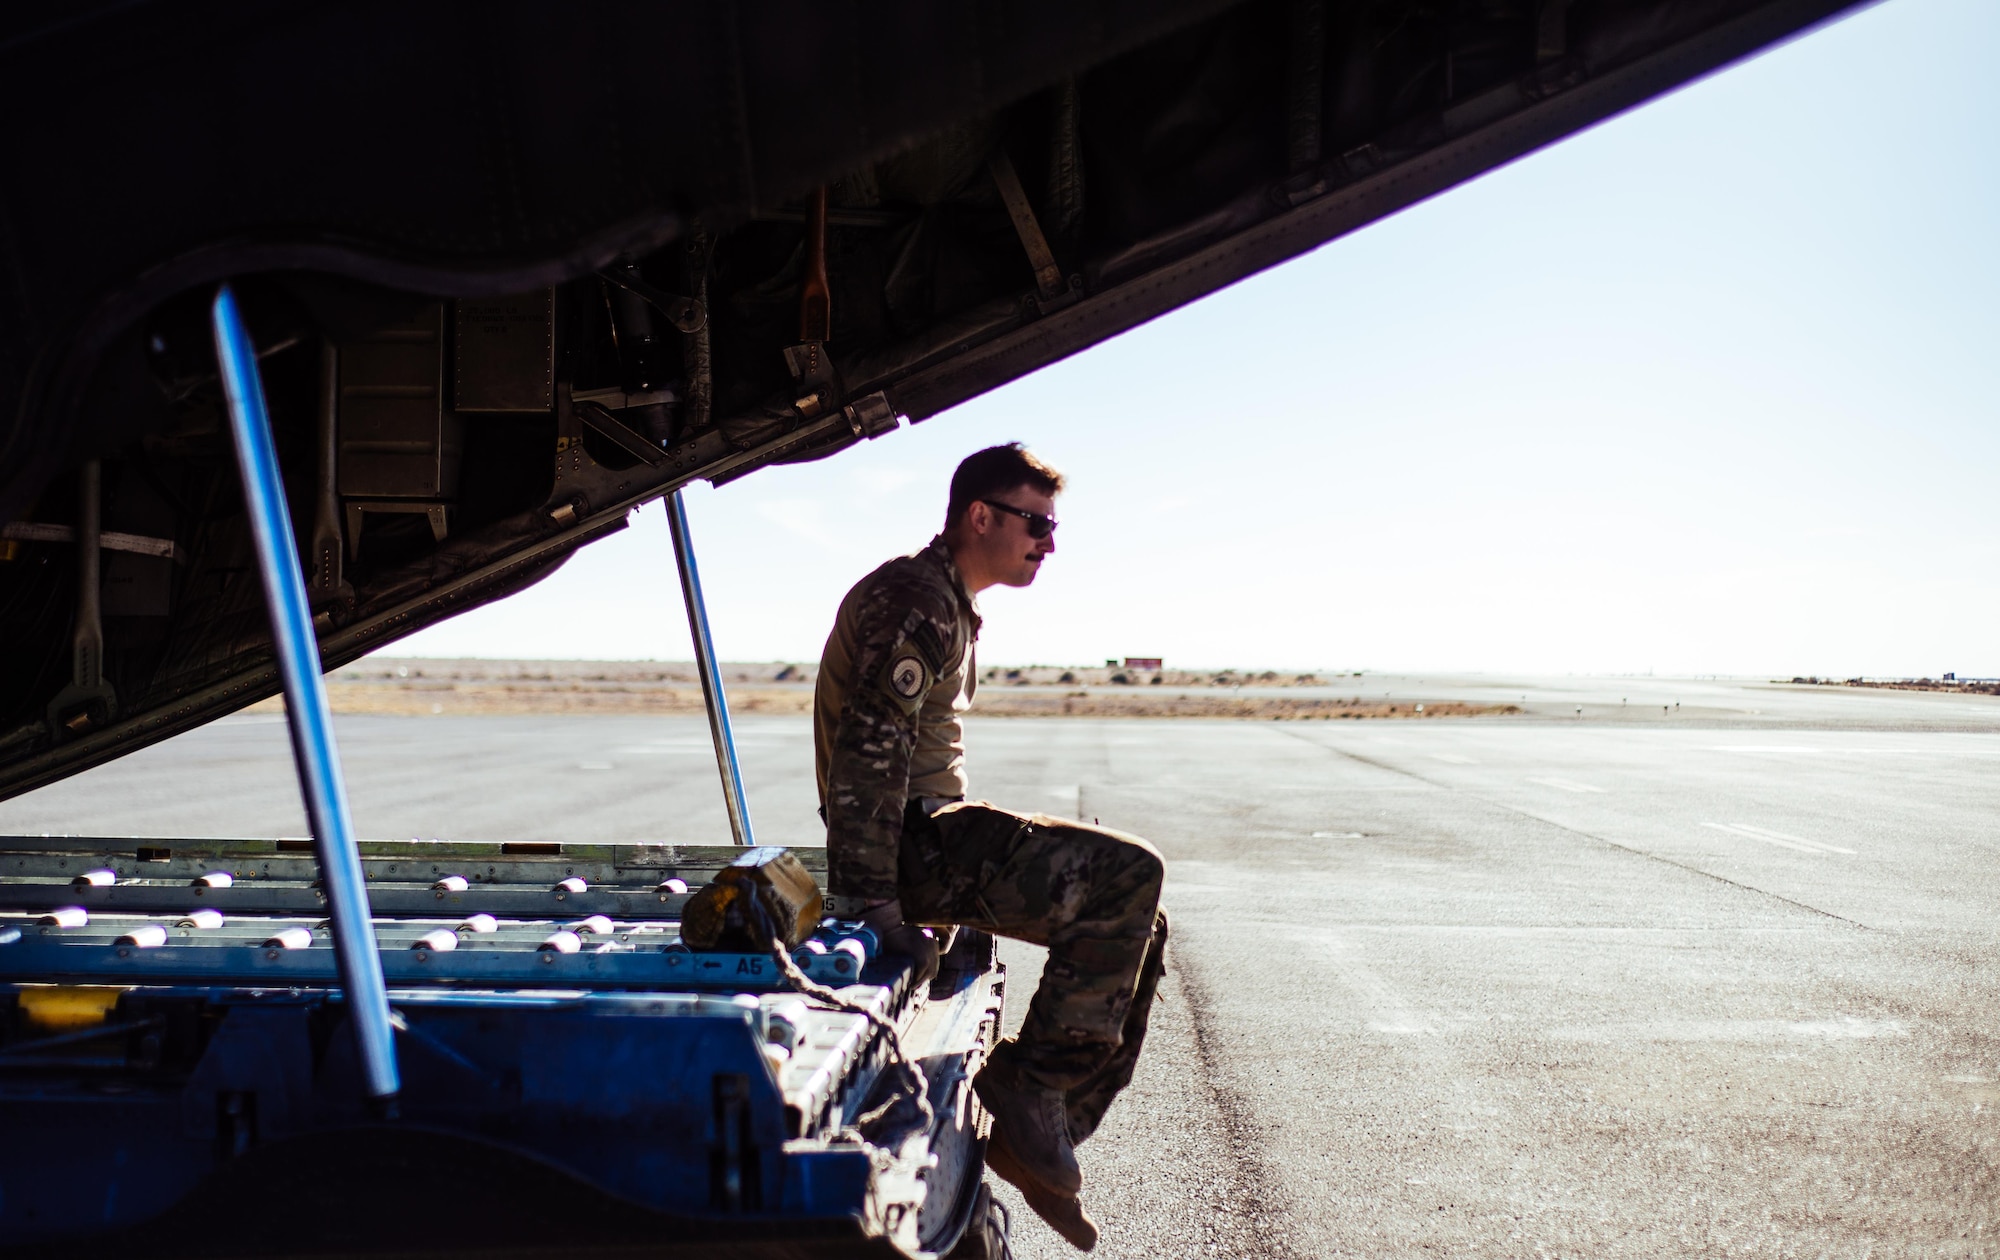 U.S. Air Force Staff Sgt. Nick Barth, 737th Expeditionary Airlift Squadron loadmaster, waits for the remainder of the crew he is flying with to complete preflight checks for a C-130 Hercules before take-off at an undisclosed location in Southwest Asia, Feb. 4, 2017. Barth was part of a team that delivered thousands of pounds in supplies to aid in the fight against Islamic State of Iraq and the Levant and Mosul offensive. (U.S. Air Force photo by Senior Airman Jordan Castelan)